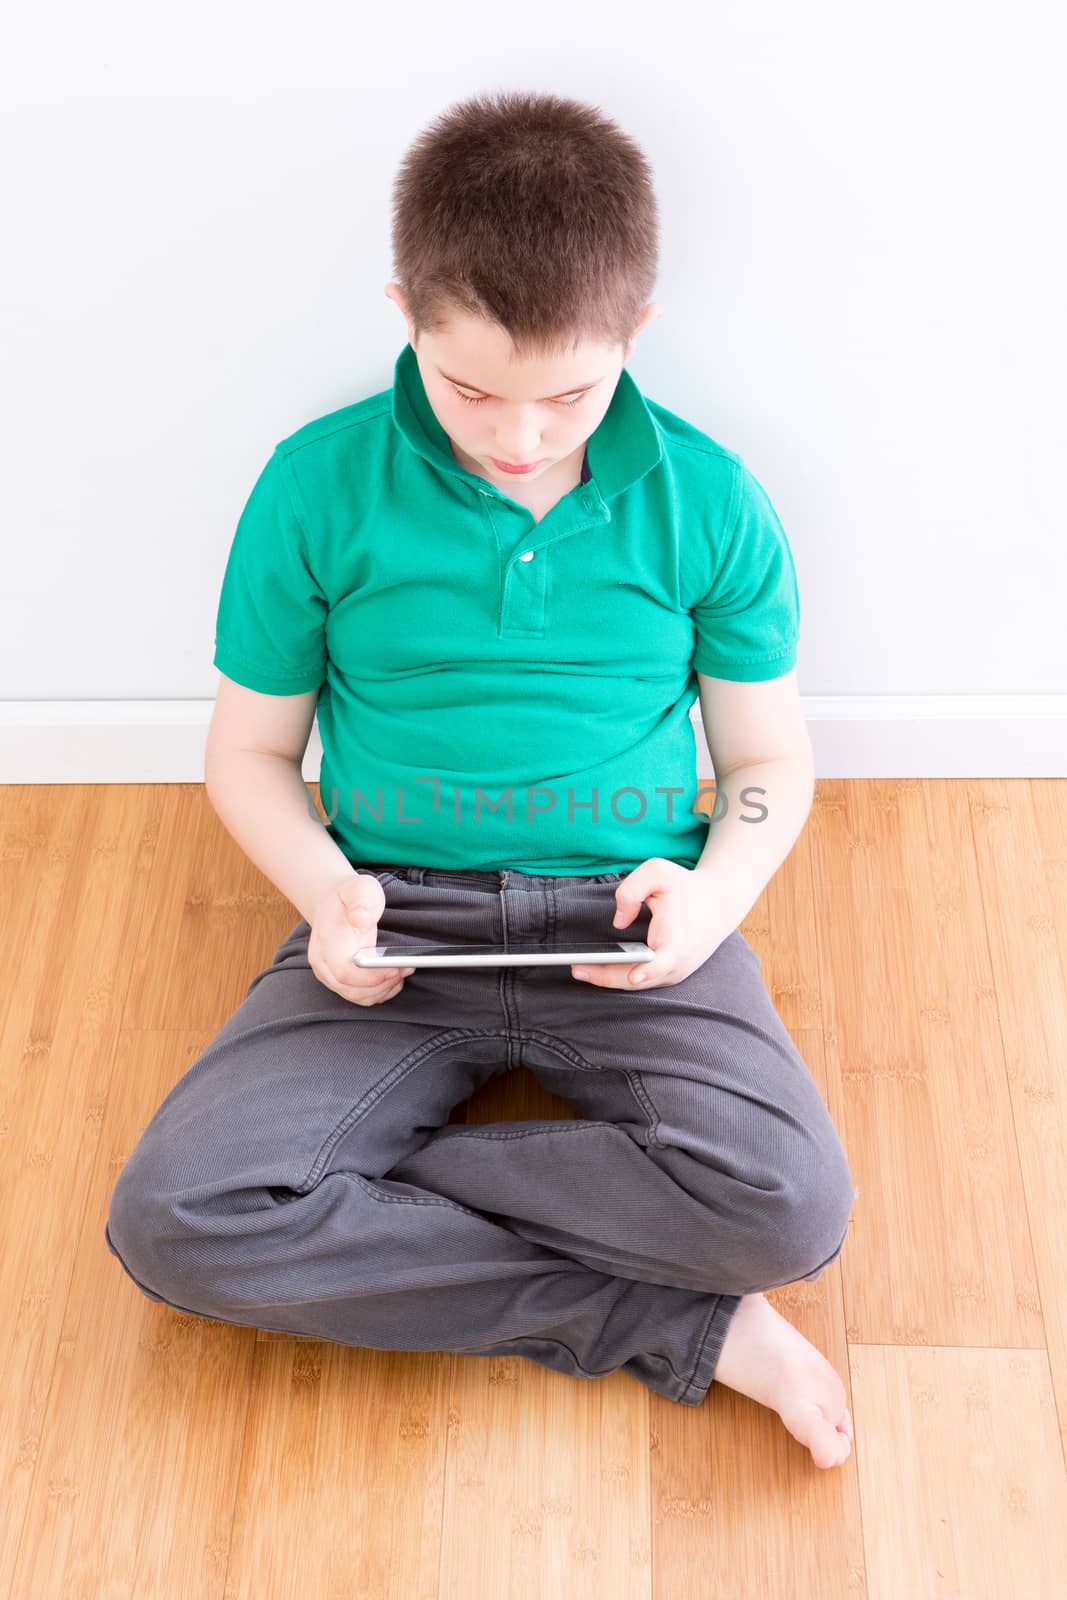 10 Year Old Young Boy Sitting on the Floor with Legs Crossed, Holding a Tablet Computer While Leaning on the Wall, Captured in High Angle View.